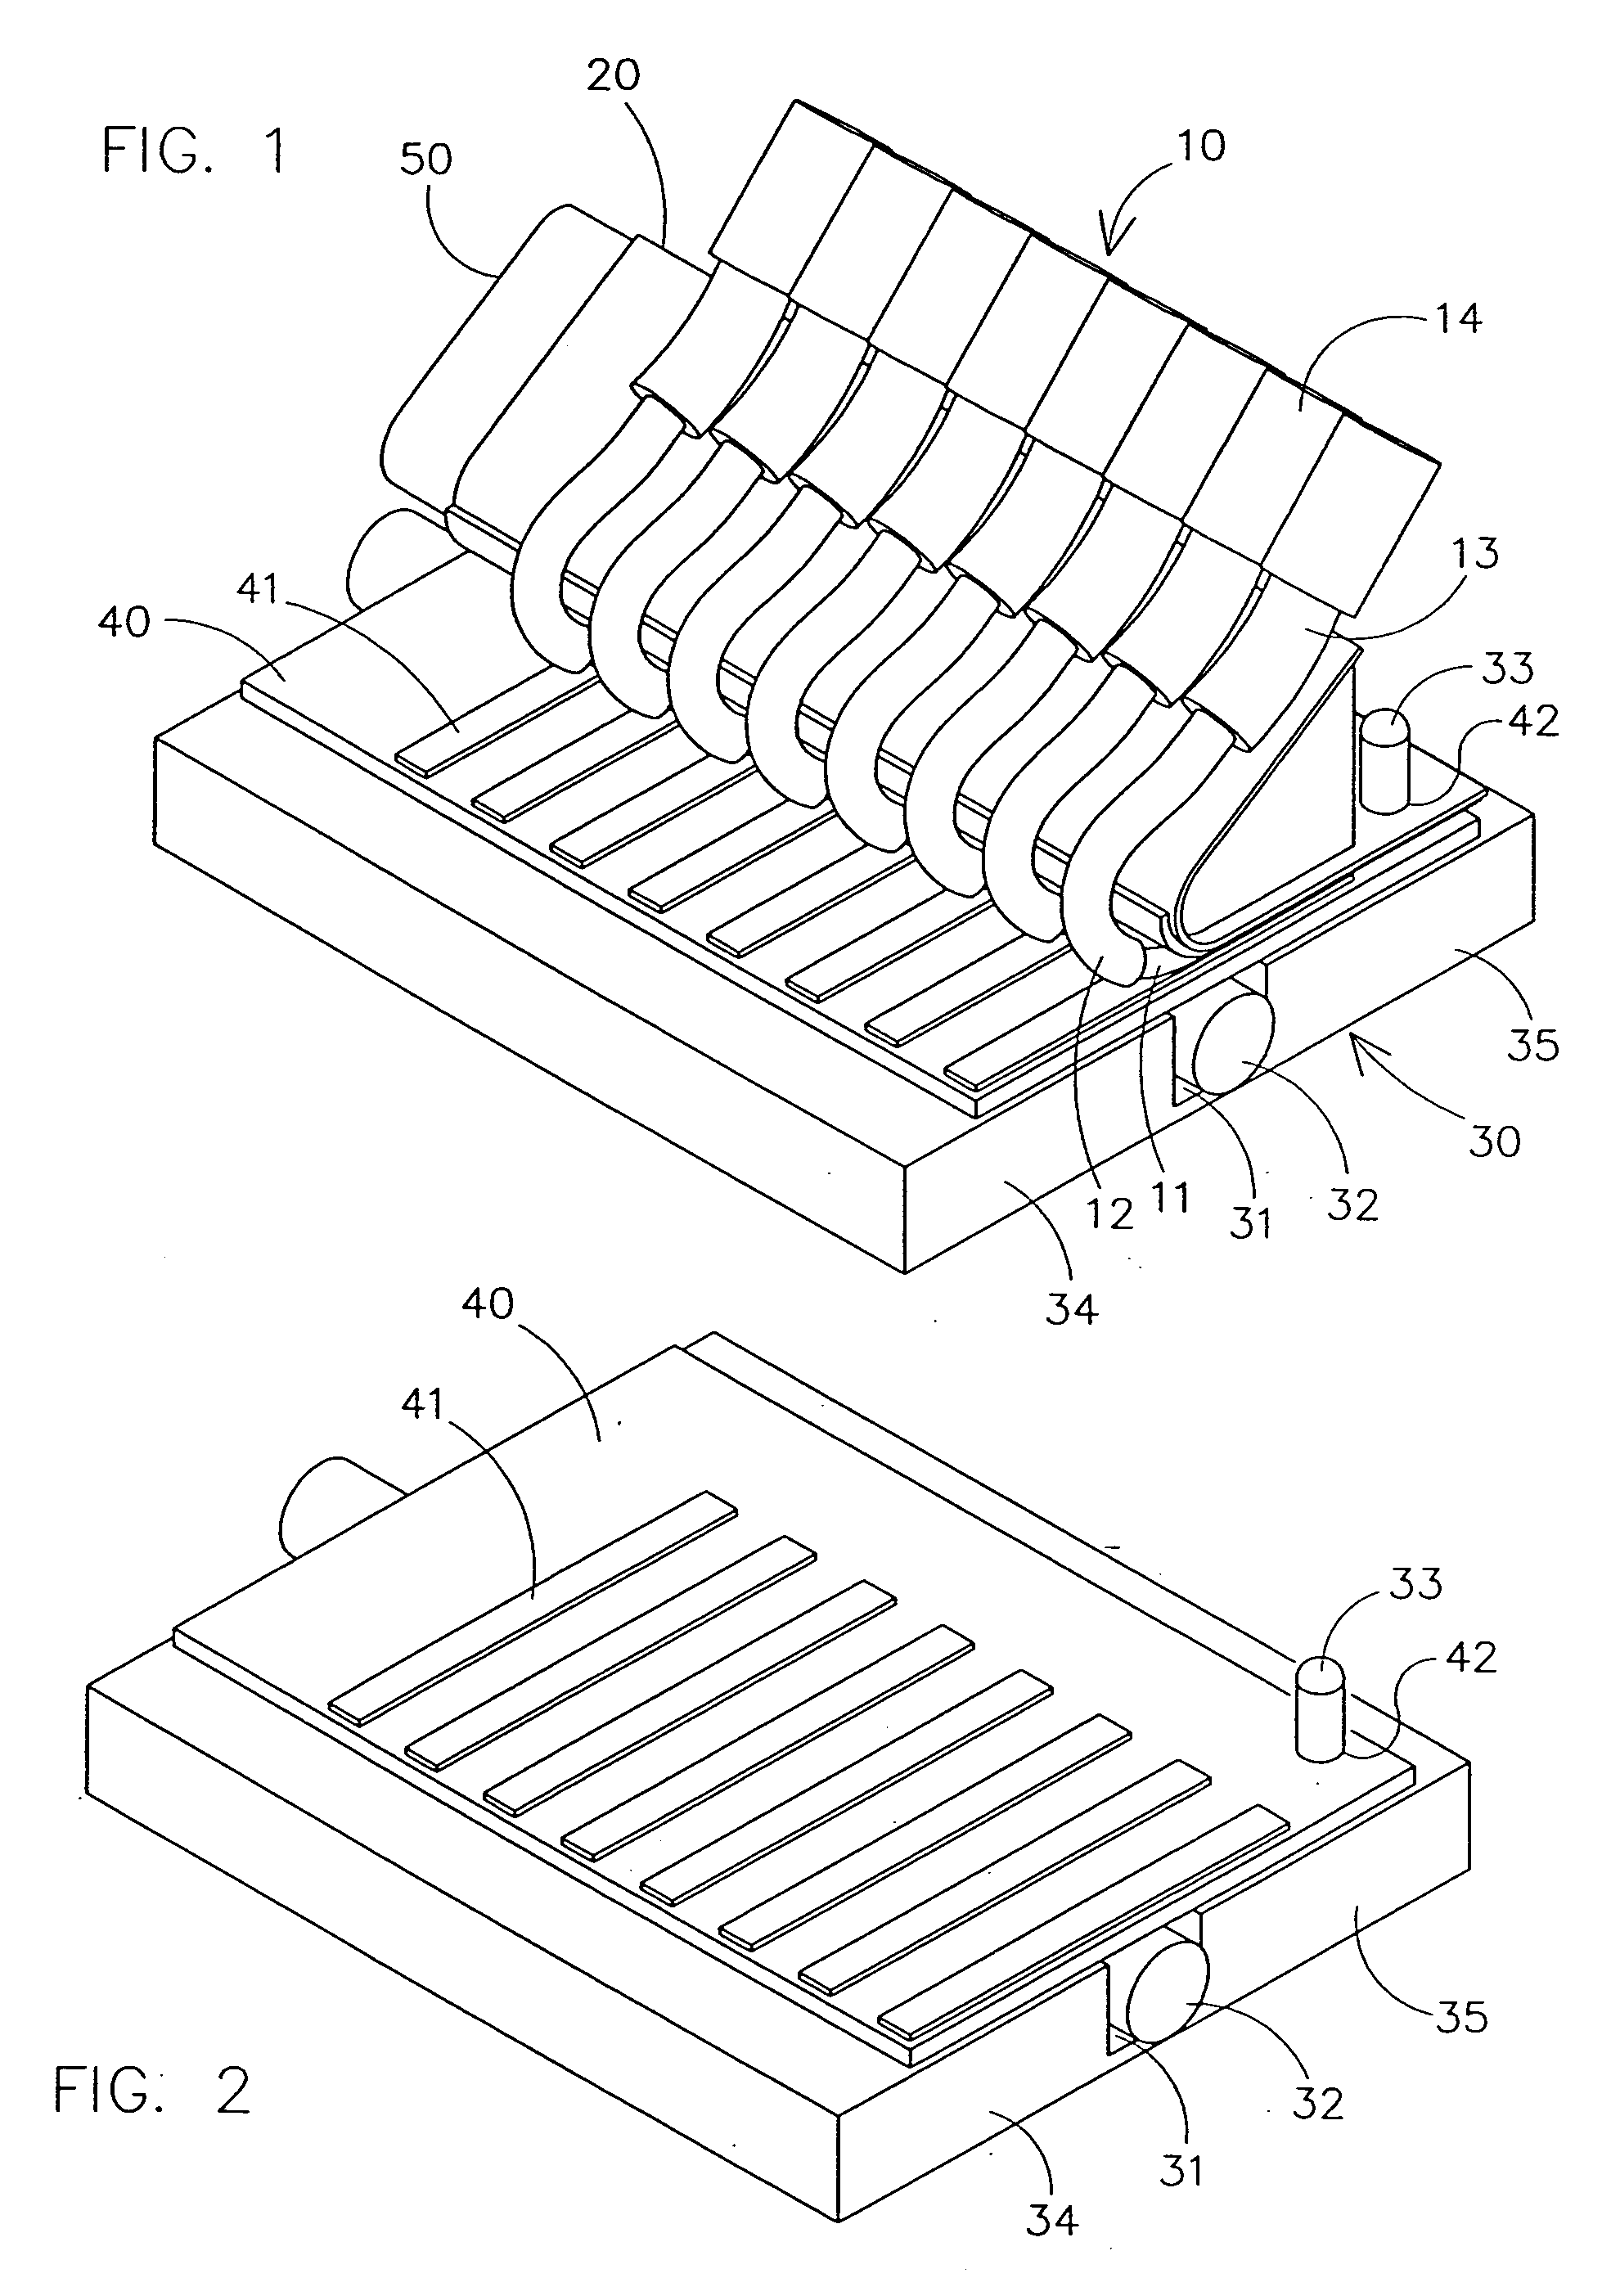 Method and apparatus for connecting multiple coaxial cables to a printed circuit board in a compact